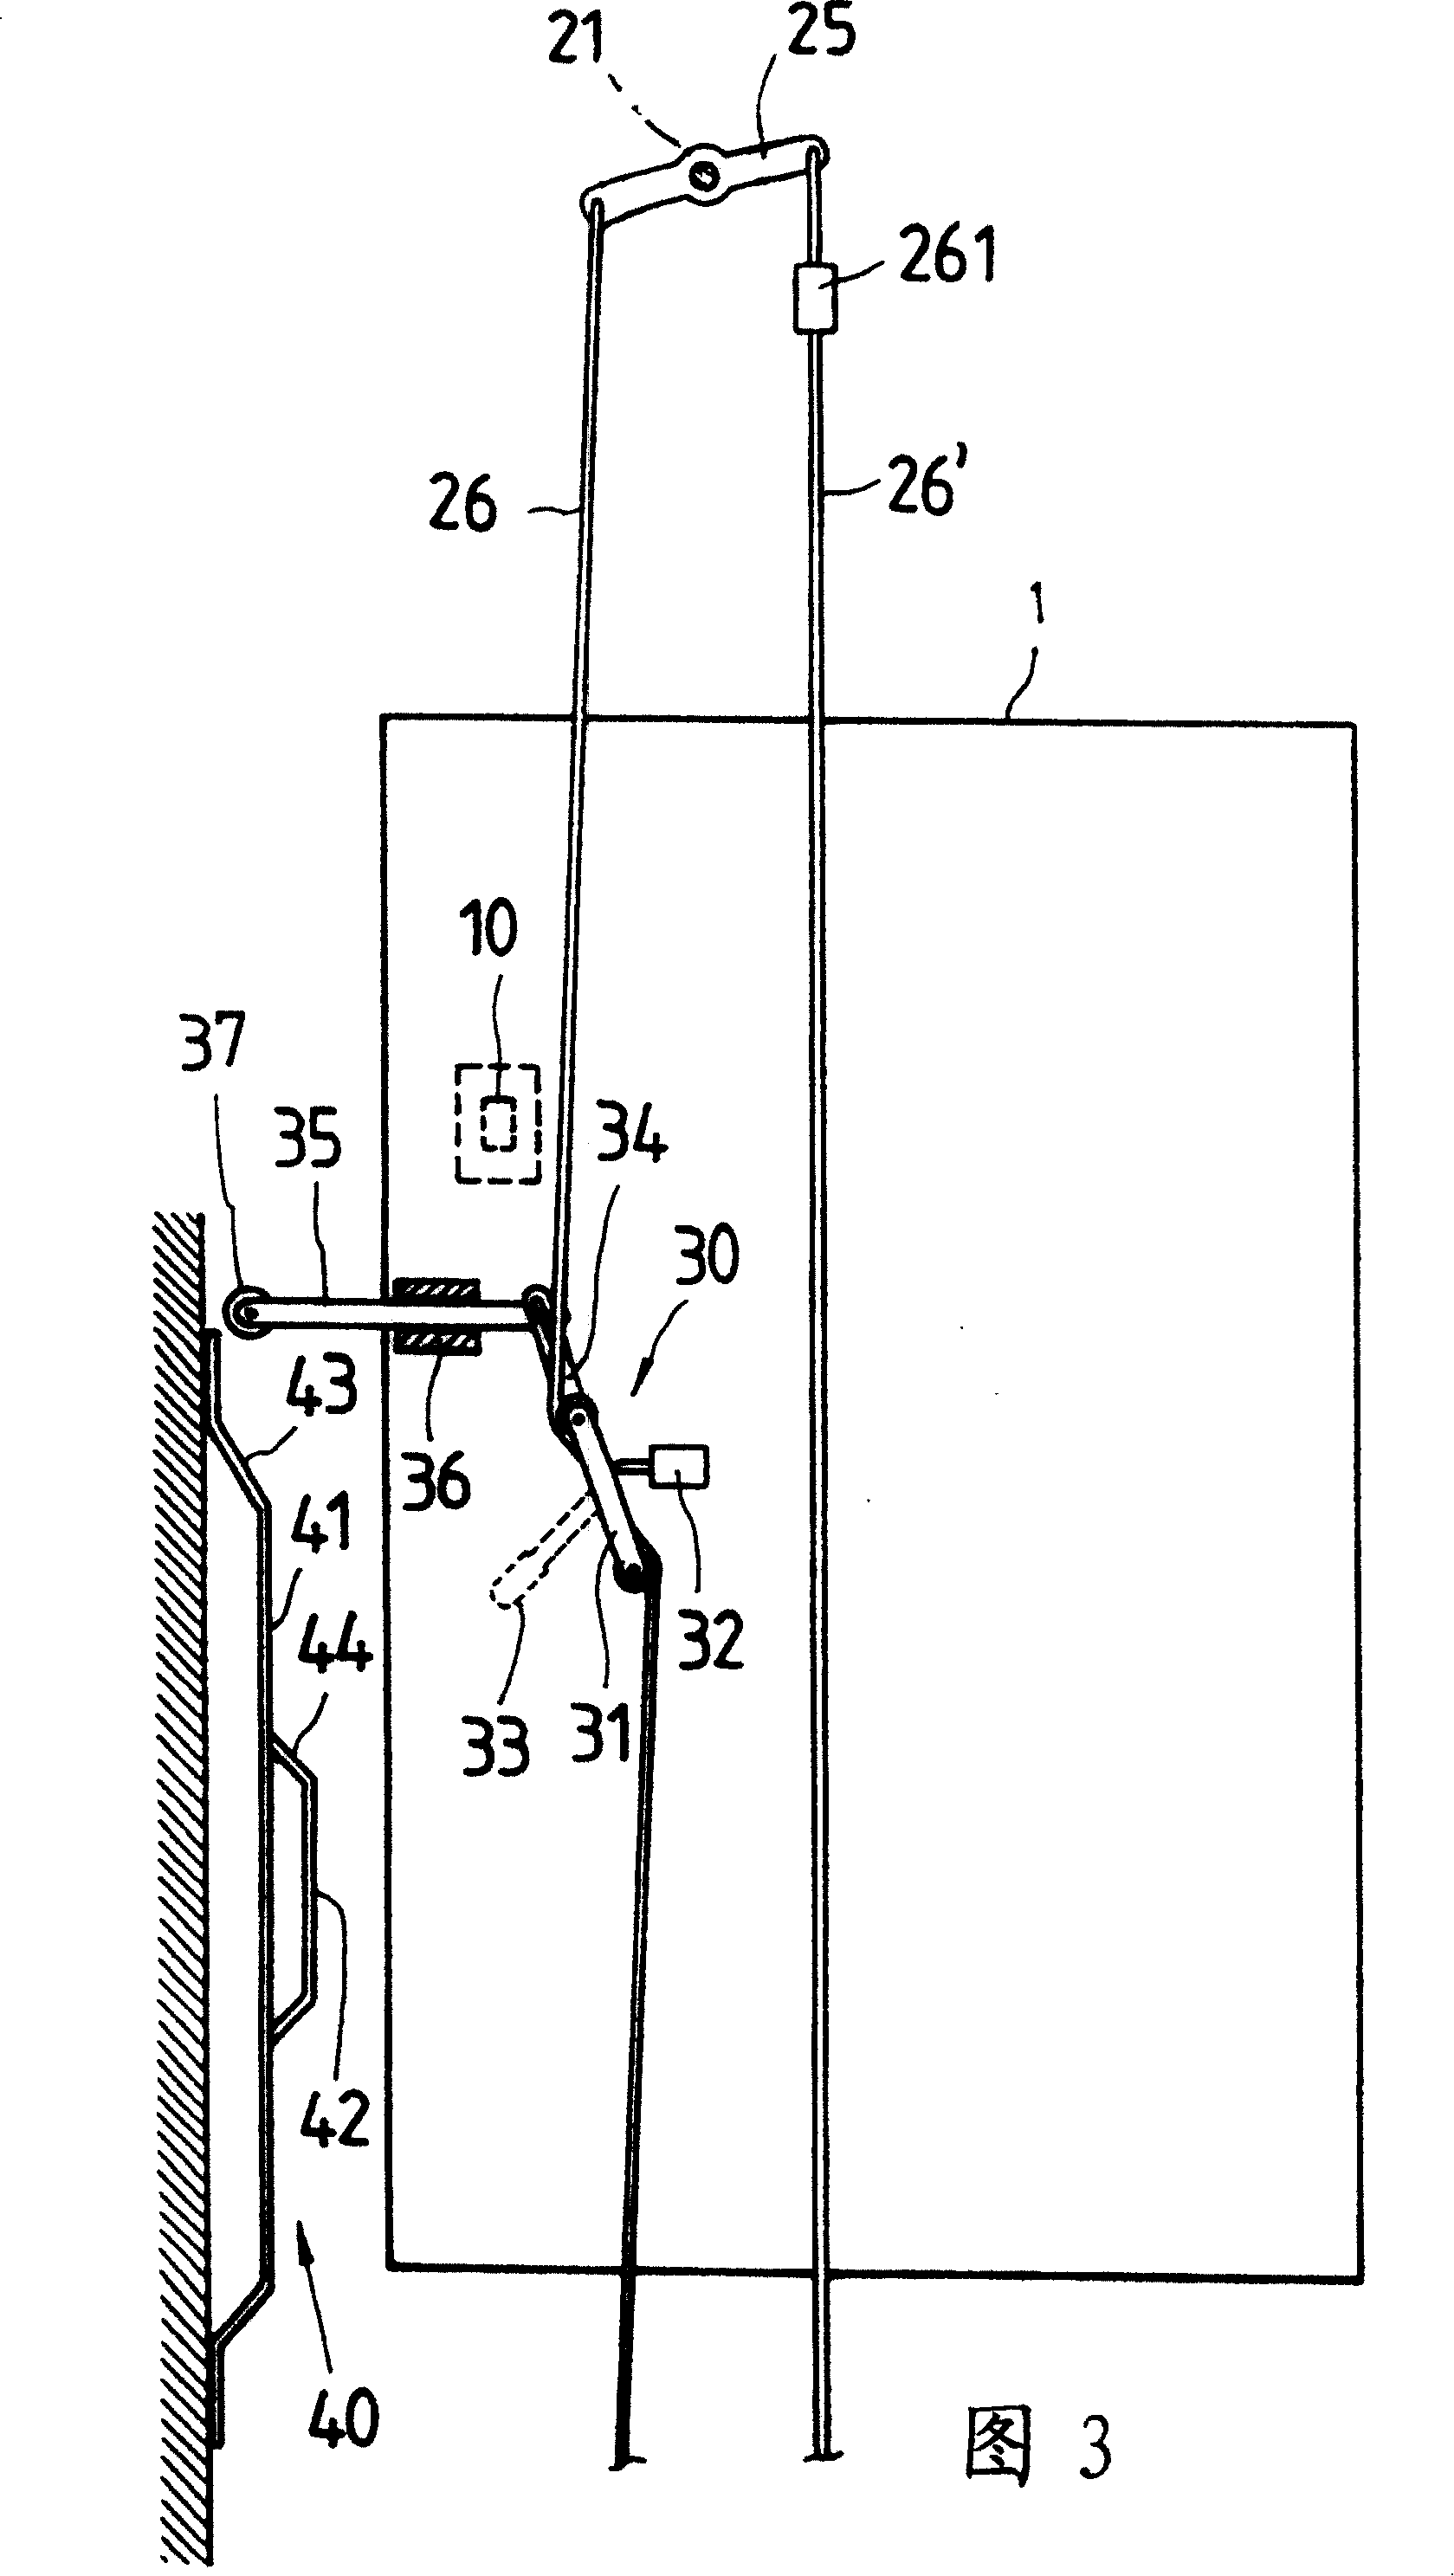 Escape device used in lifter or elevator